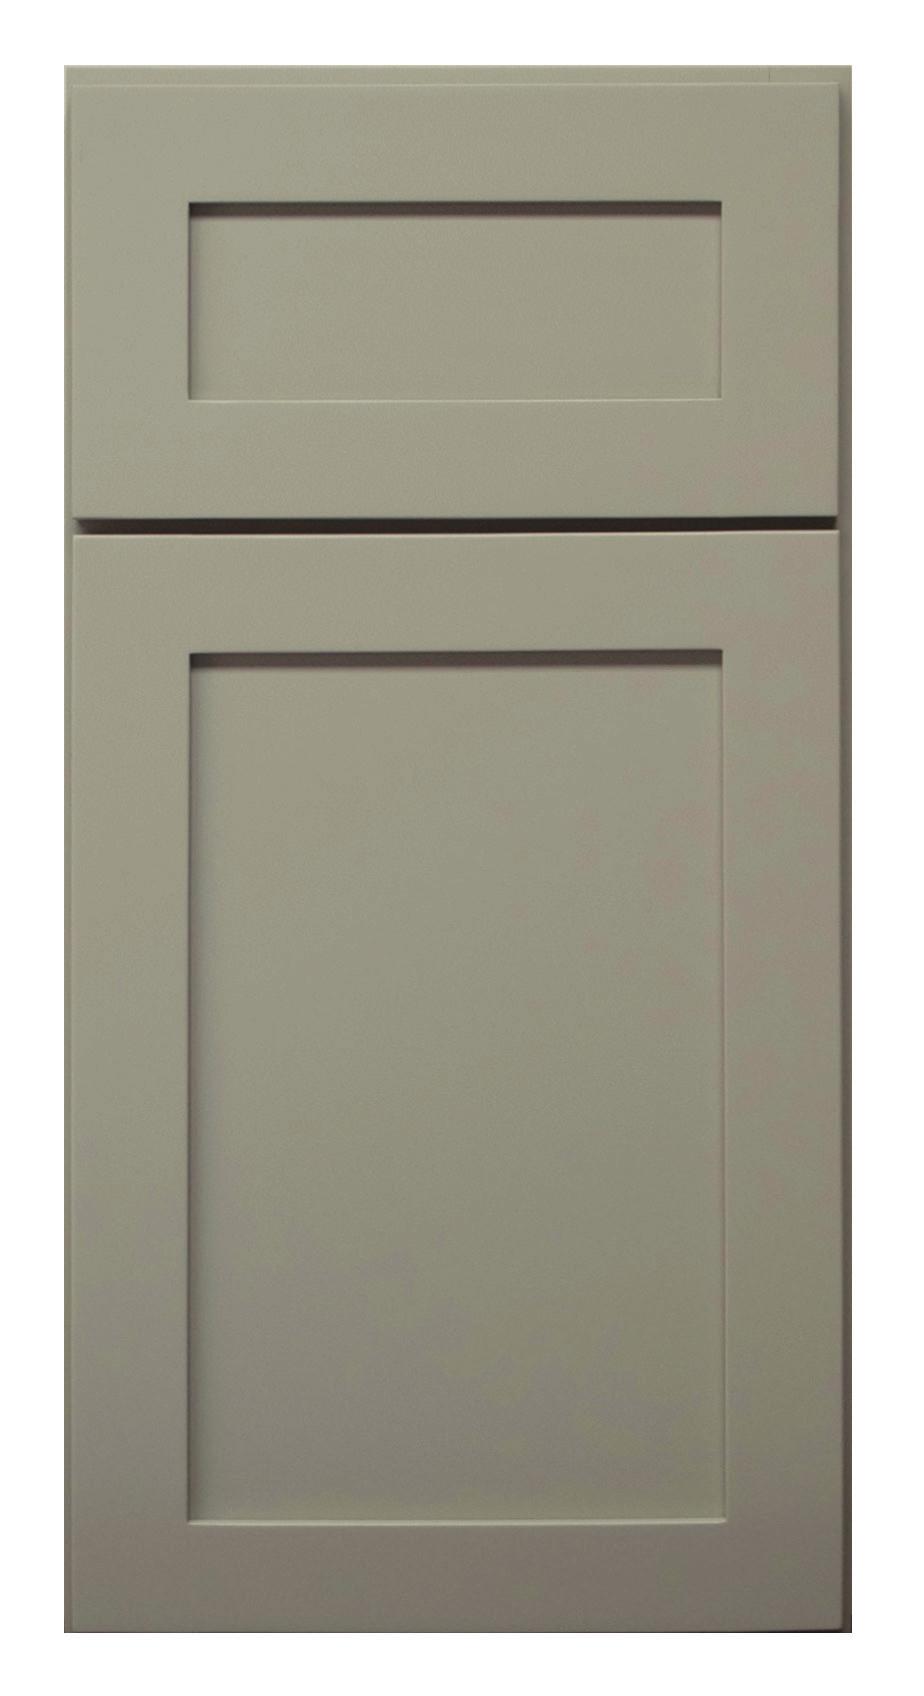 With a soft, light gray finish, the Driftwood door style is versatile